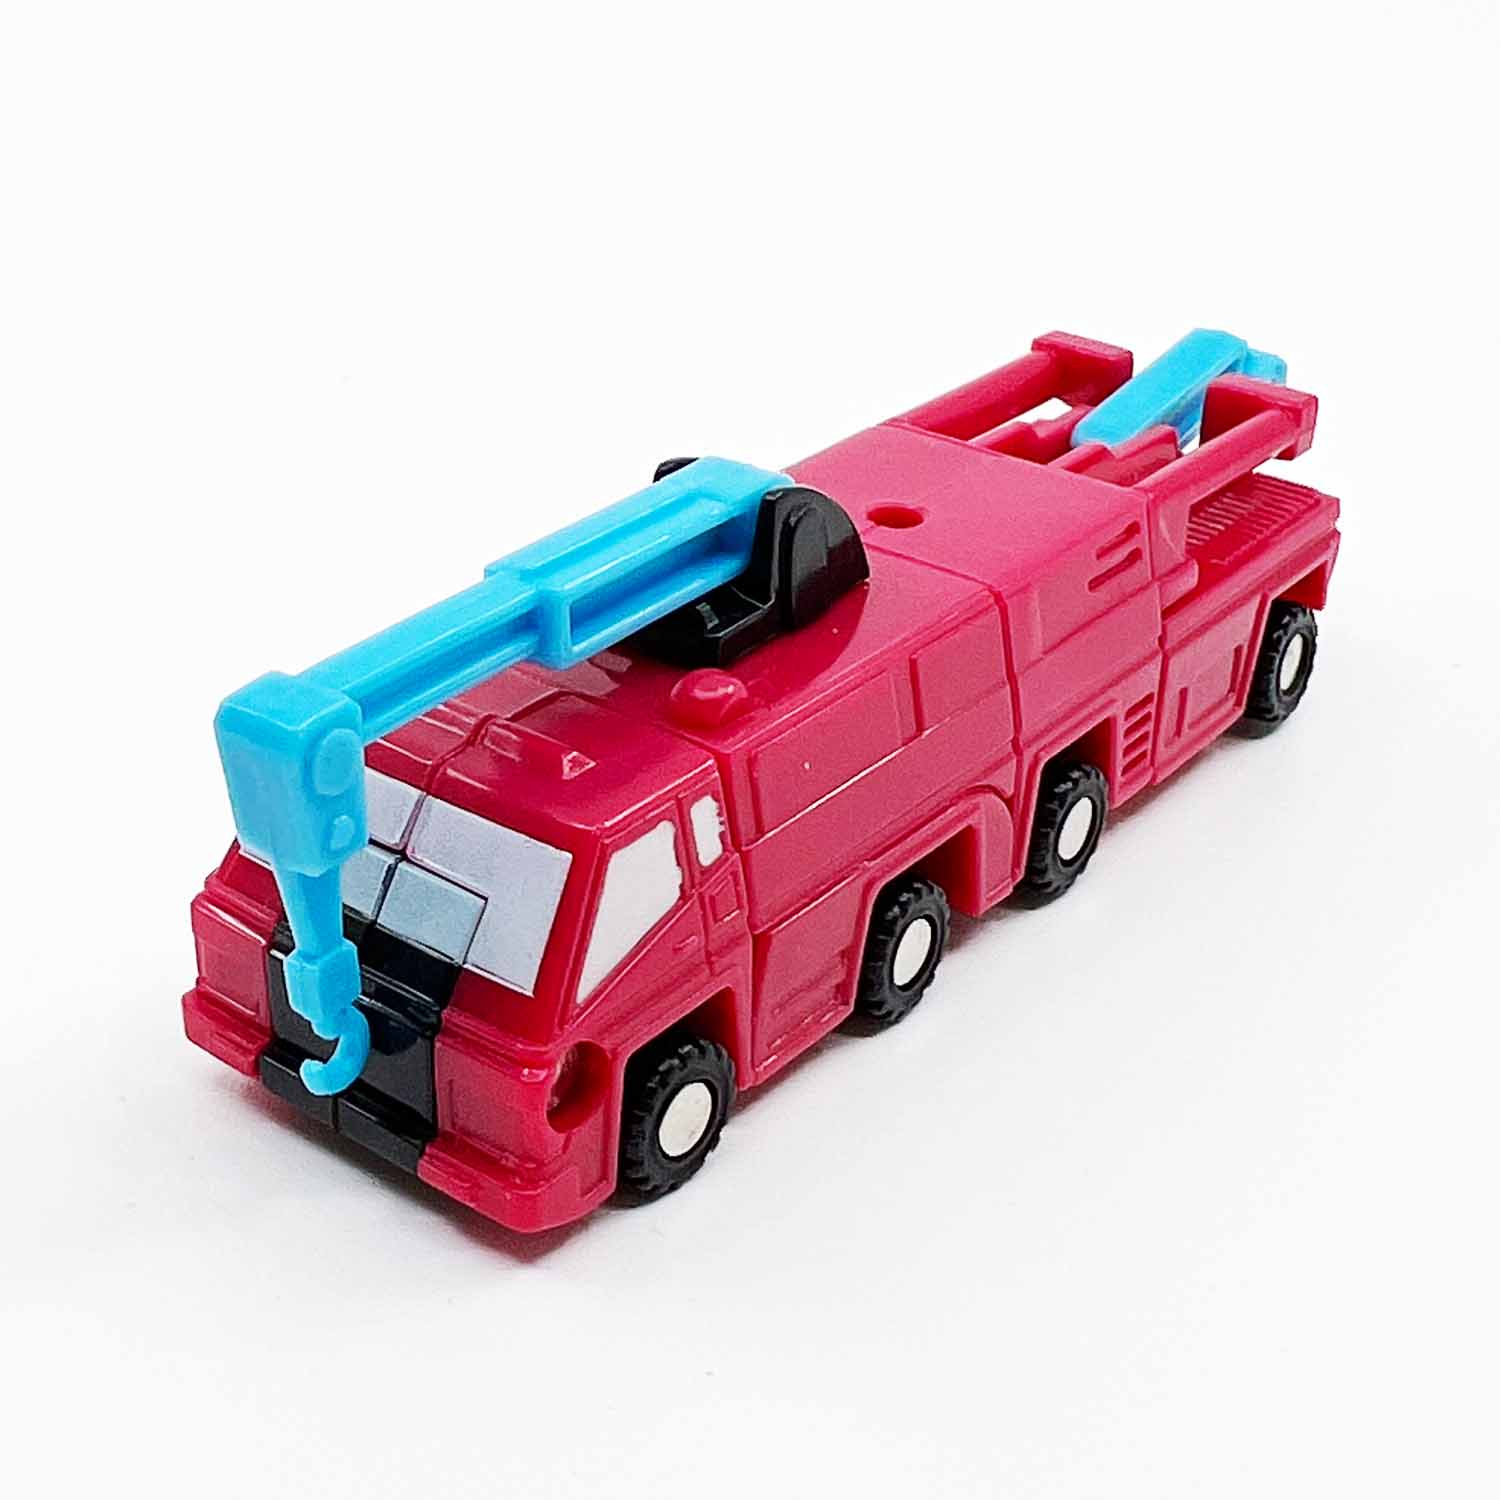 Micromaster Combiner Missle Launcher Autobot Transformers G1 1989 with Box